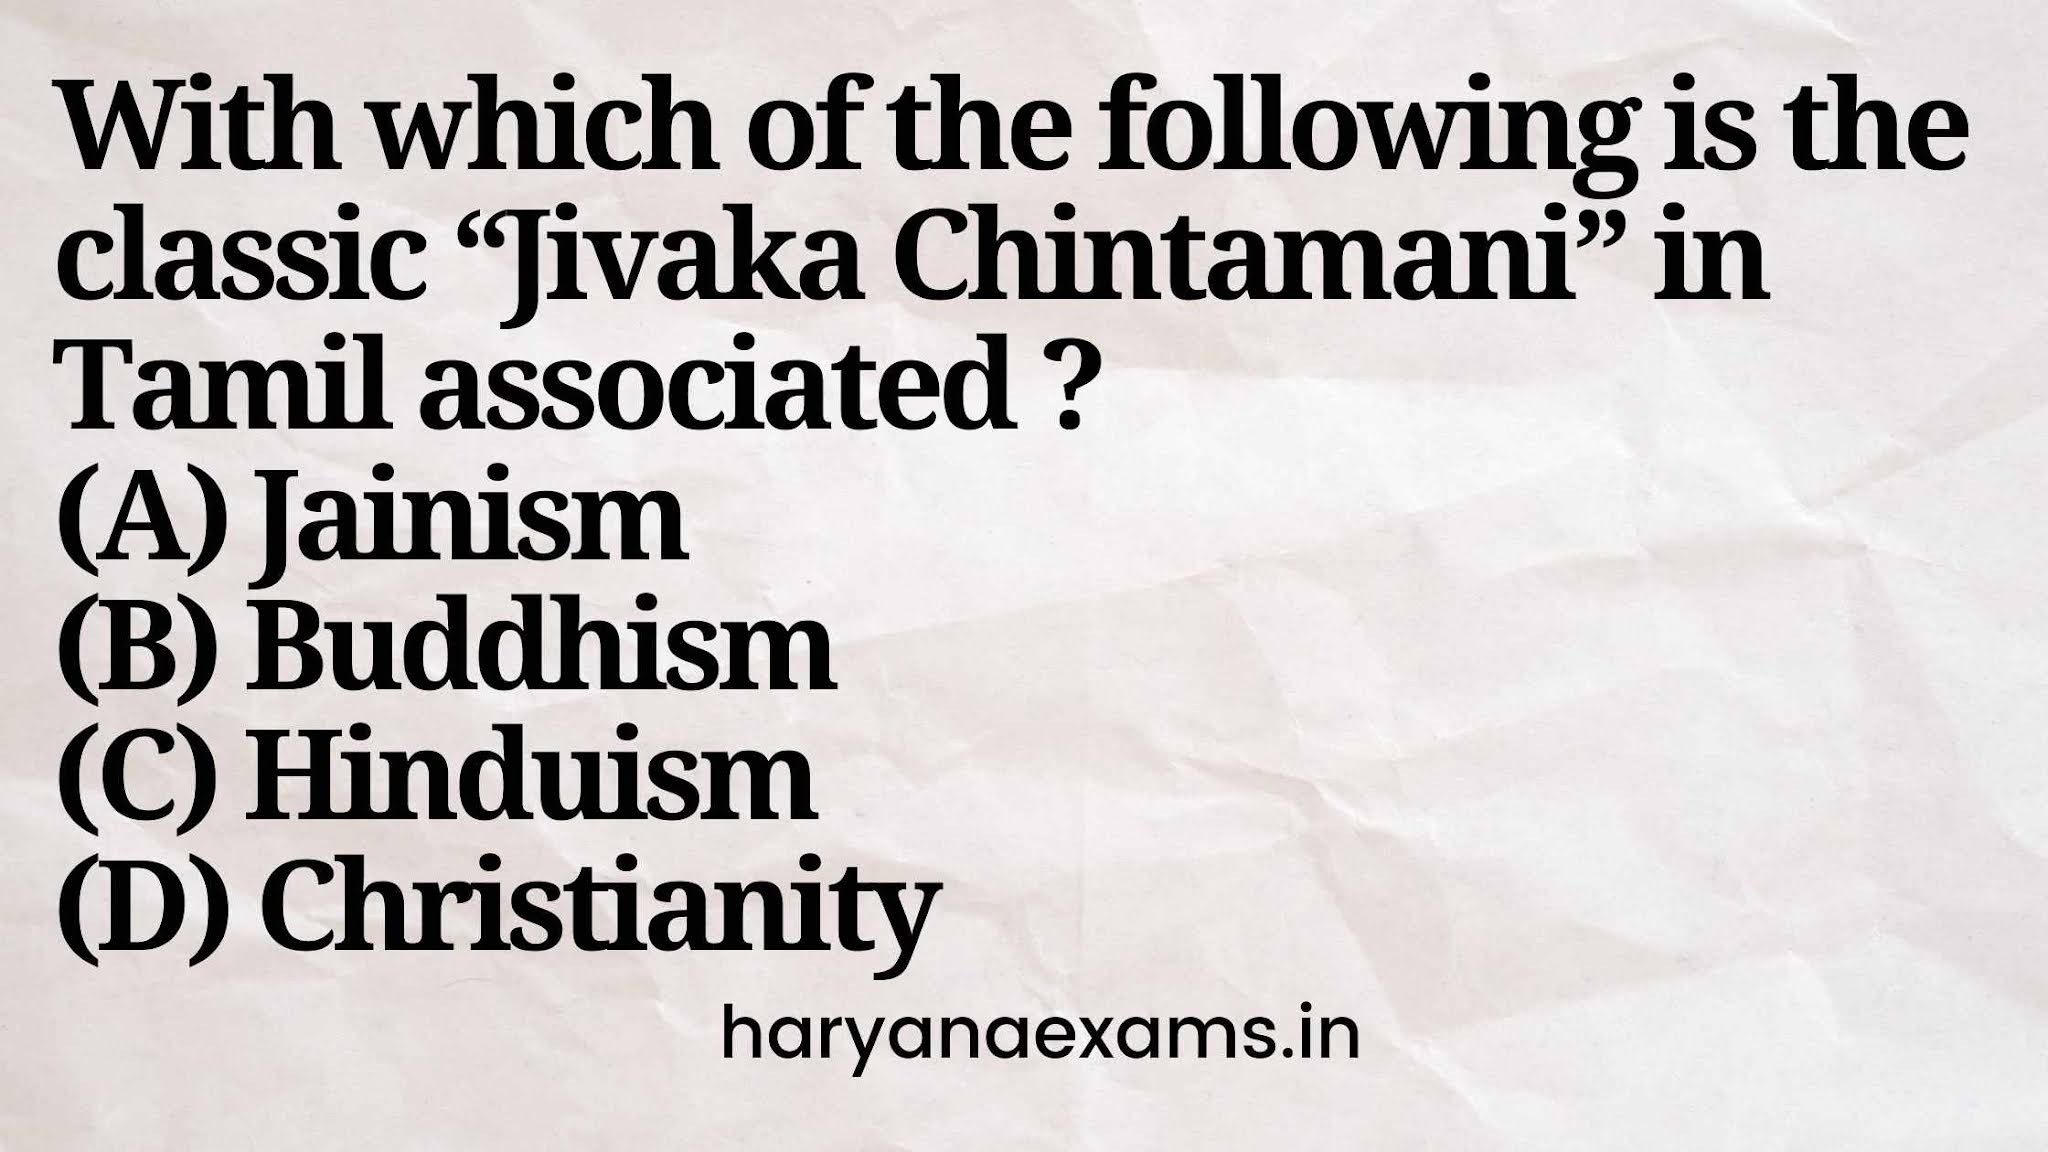 With which of the following is the classic “Jivaka Chintamani” in Tamil associated ?  (A) Jainism  (B) Buddhism  (C) Hinduism  (D) Christianity